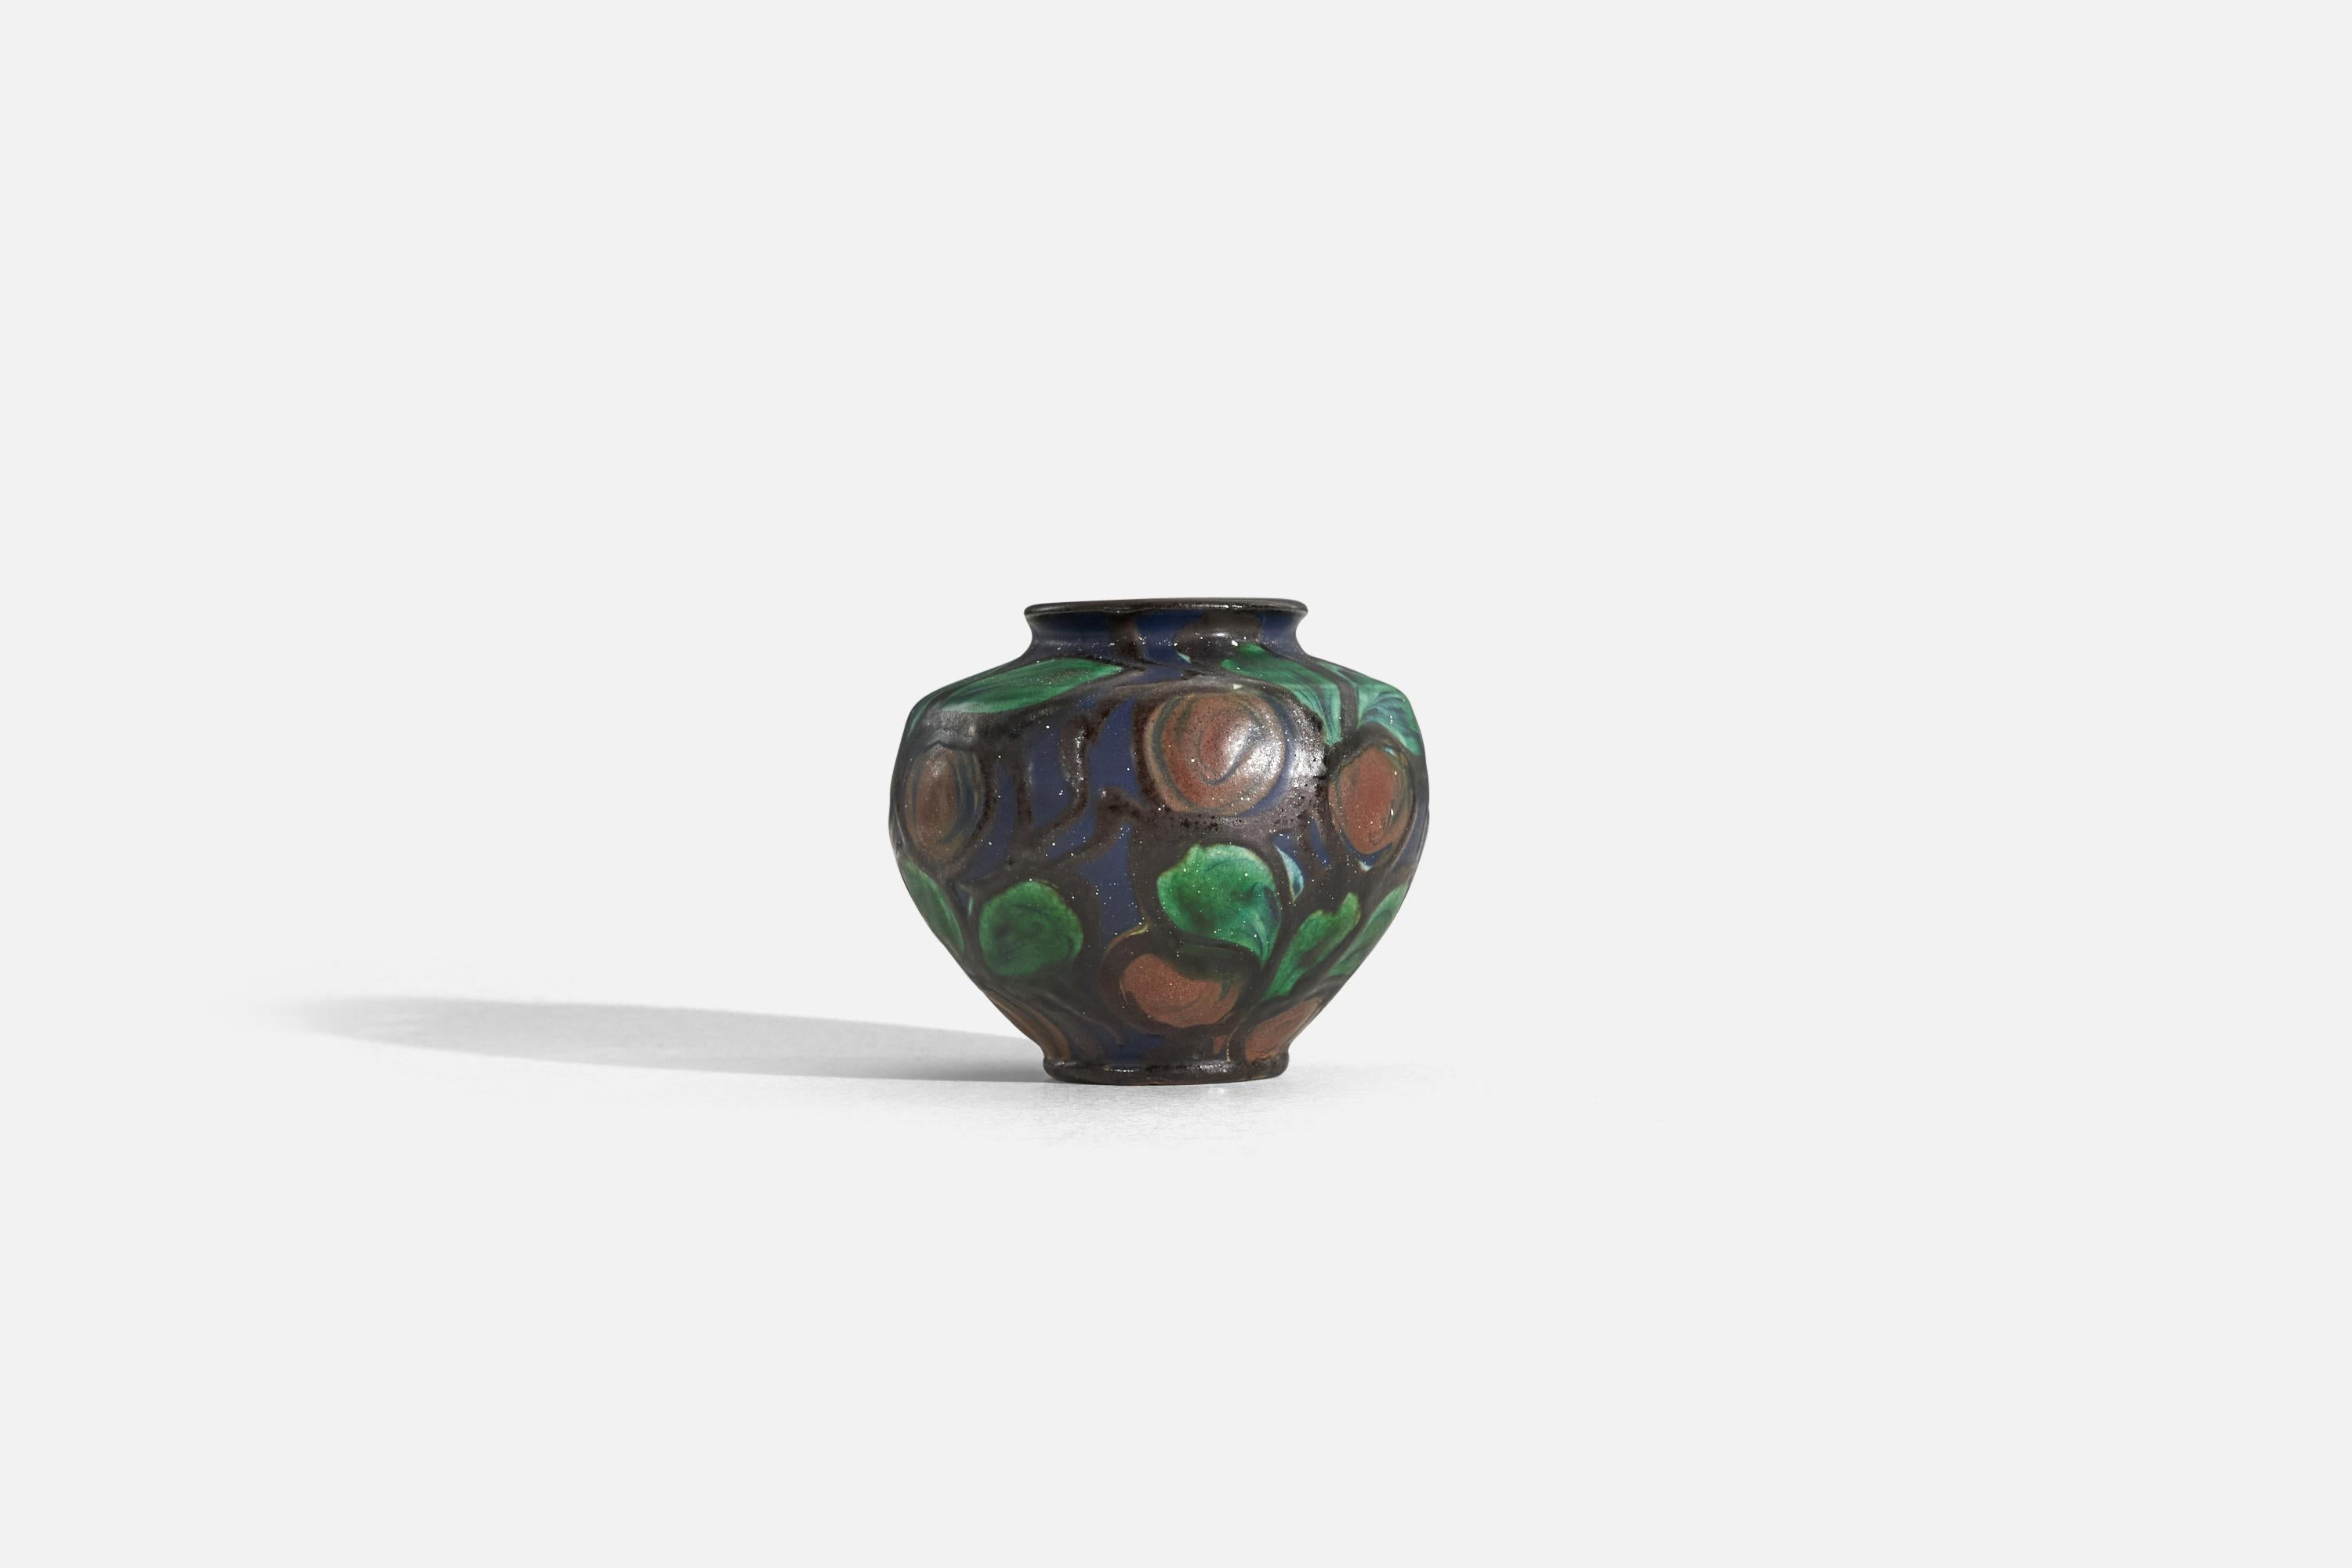 A glazed earthenware vase with a floral motif, designed and produced by Herman Kähler, Denmark, c. 1900.
  